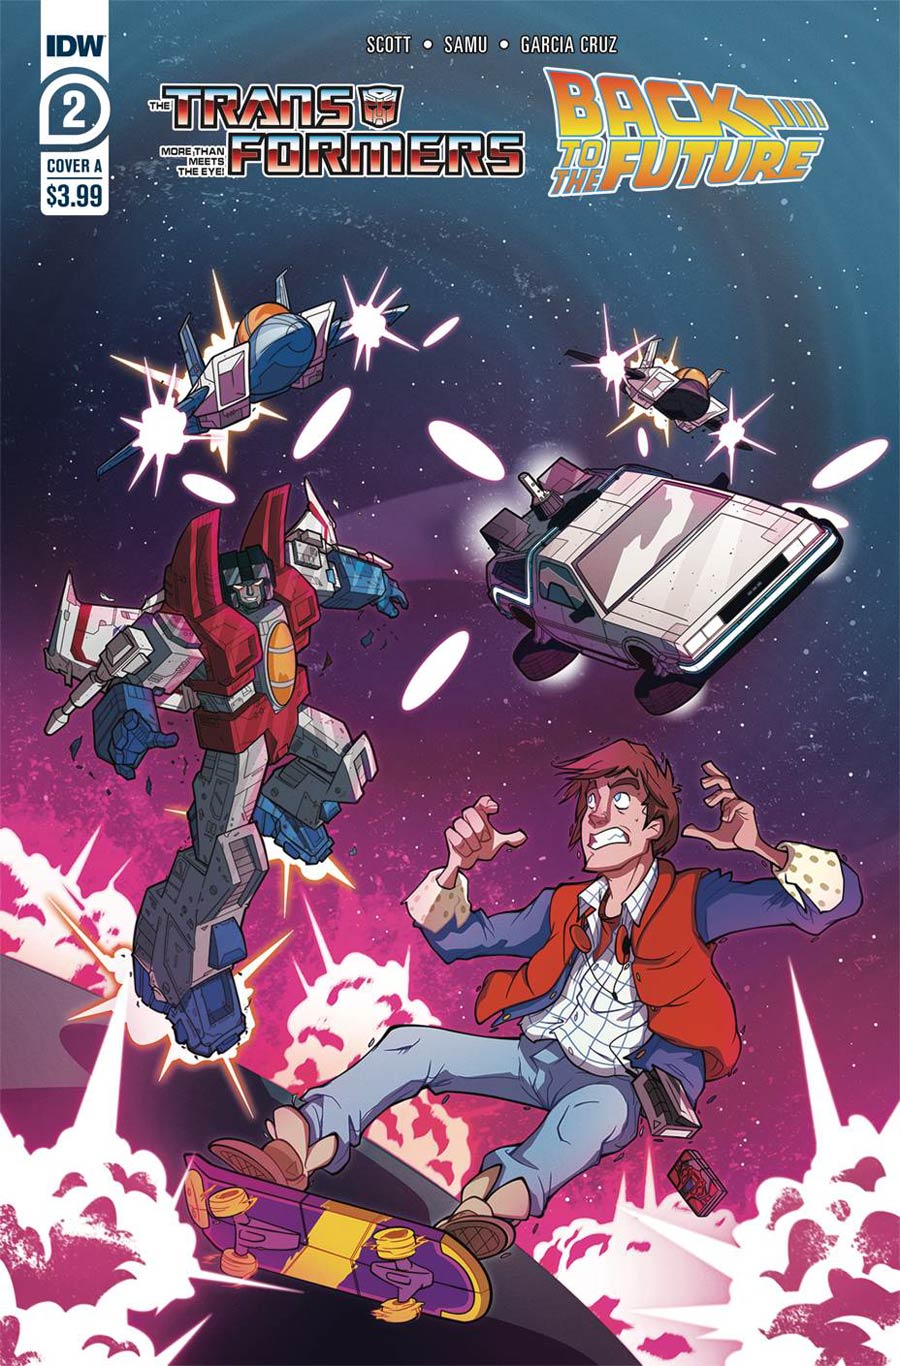 Back to the Future #3 SUB Cover IDW Comics 